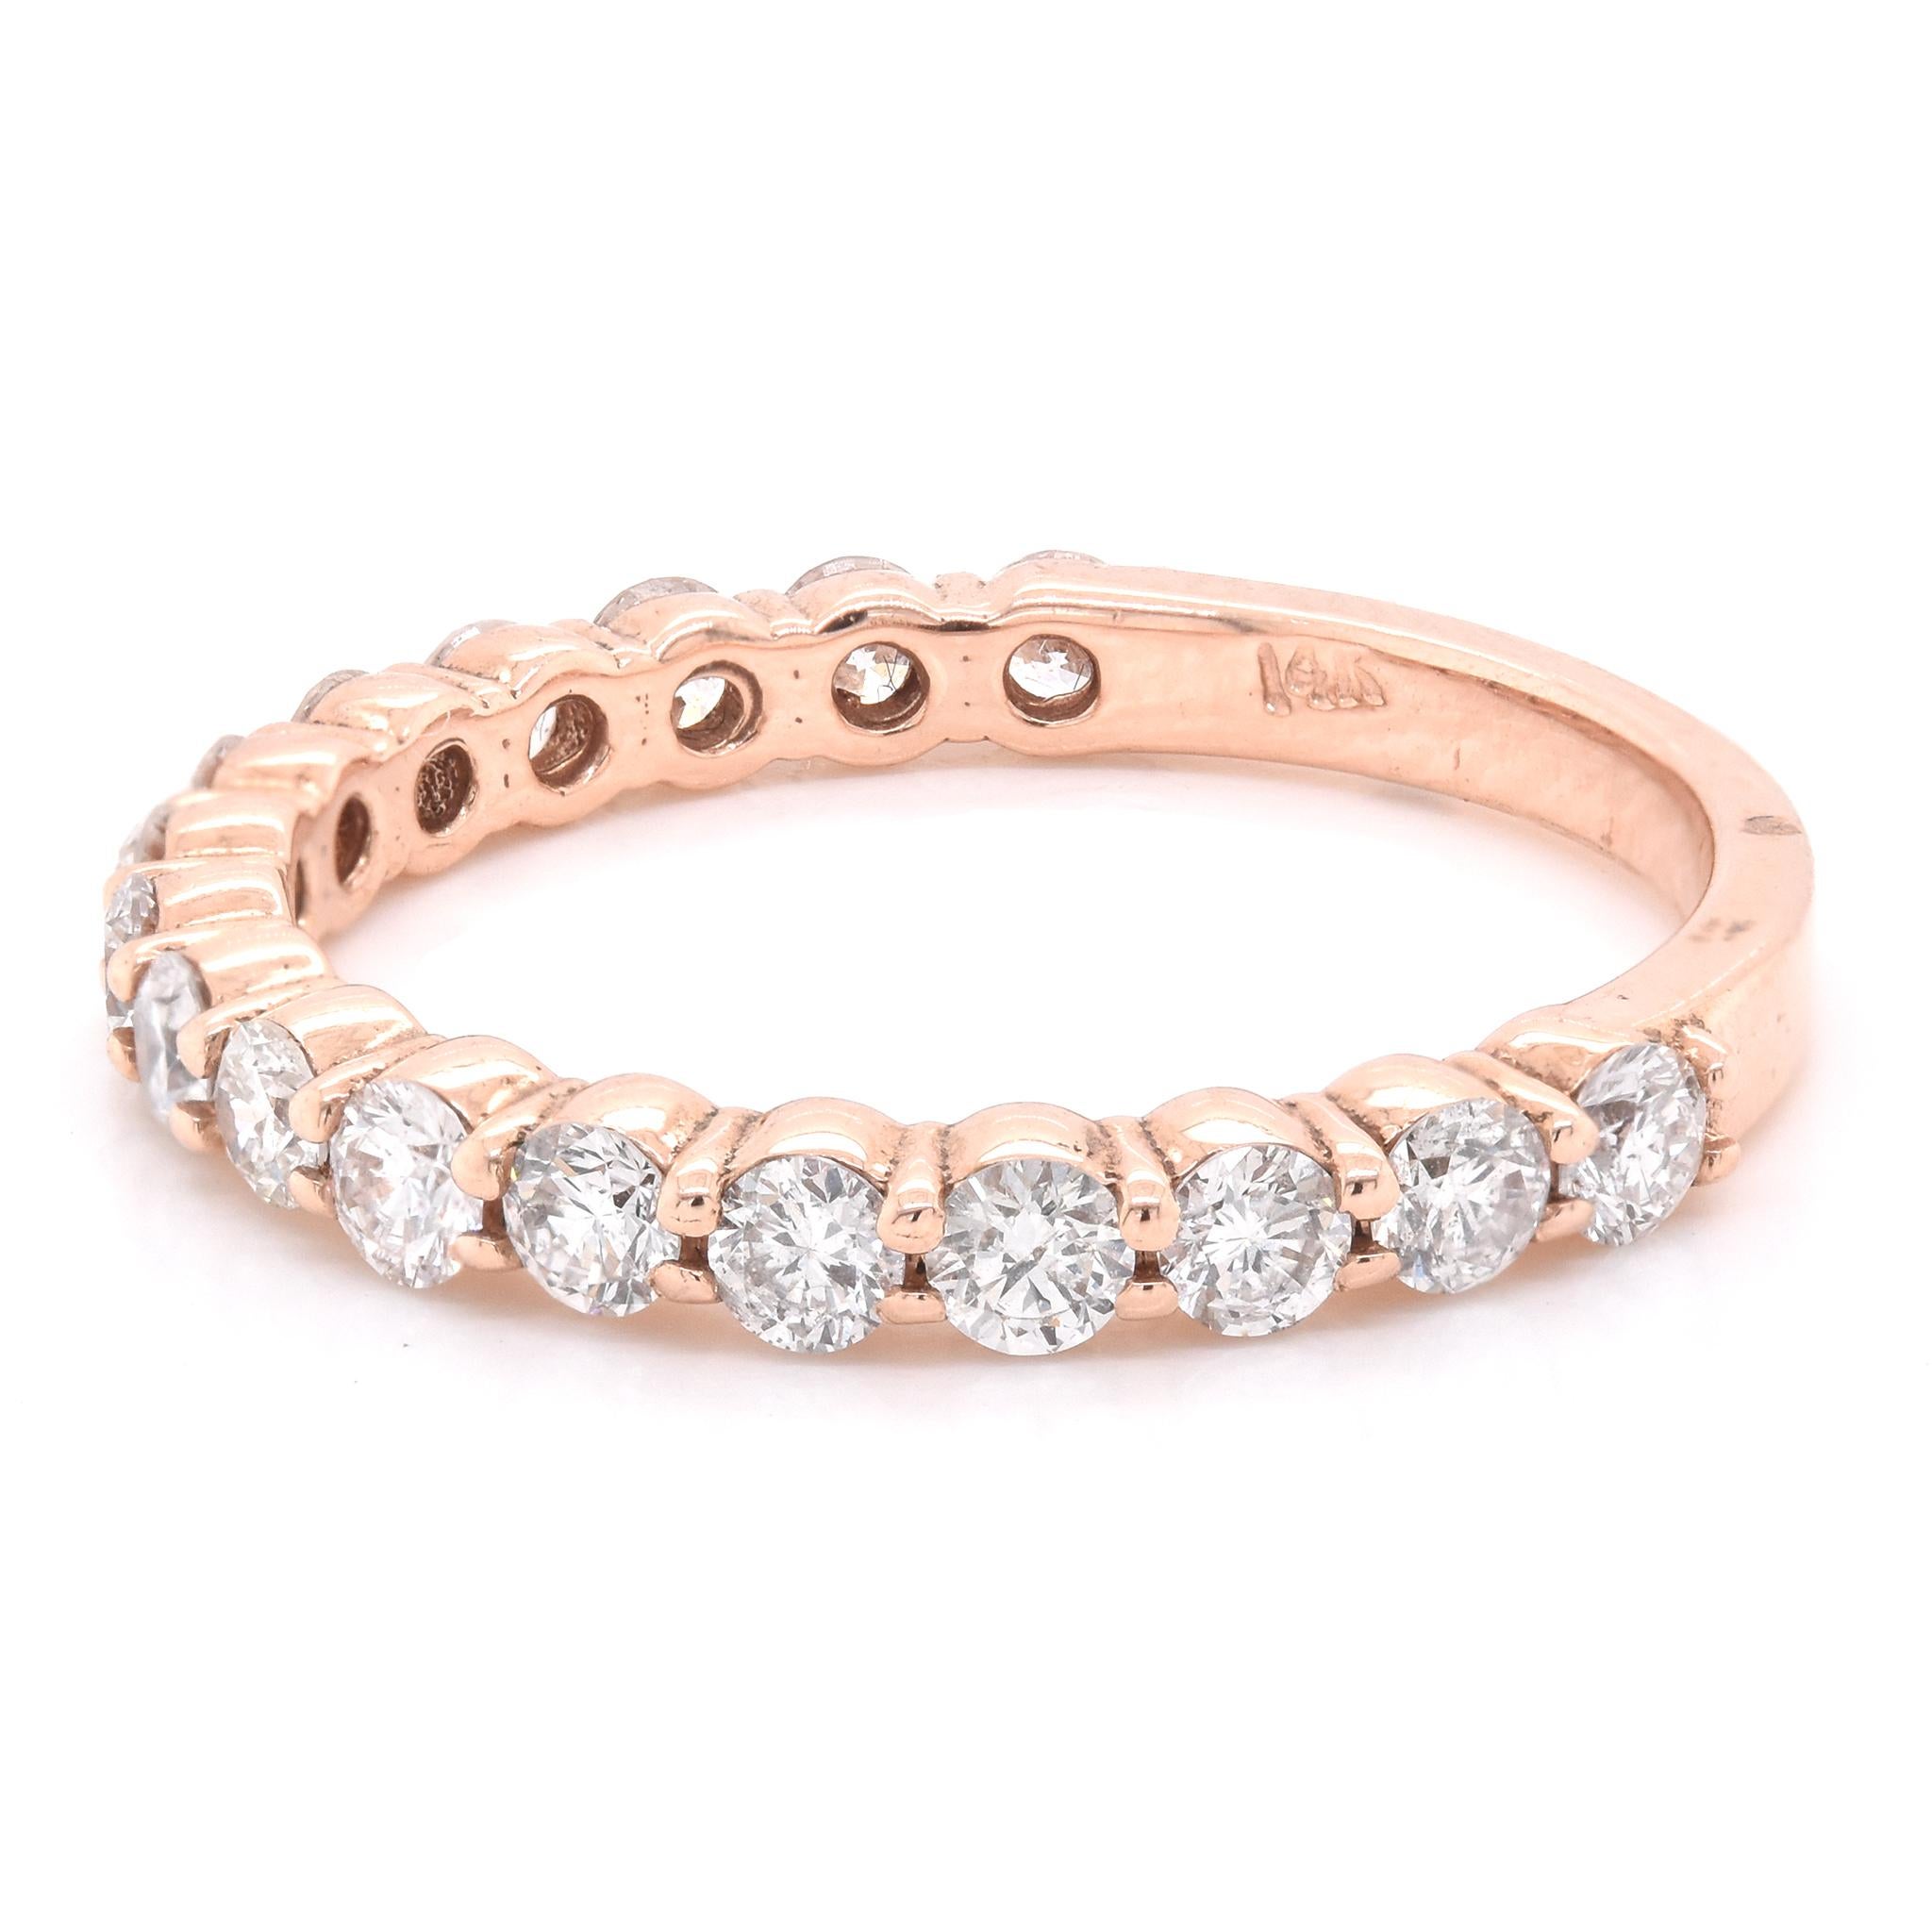 Material: 14k rose gold
Diamonds: 17 round brilliant cuts = 0.80ct
Color: H
Clarity: VS2-SI1
Size: 6
Dimensions: ring measures 2.05mm in width
Weight: 2.01 grams